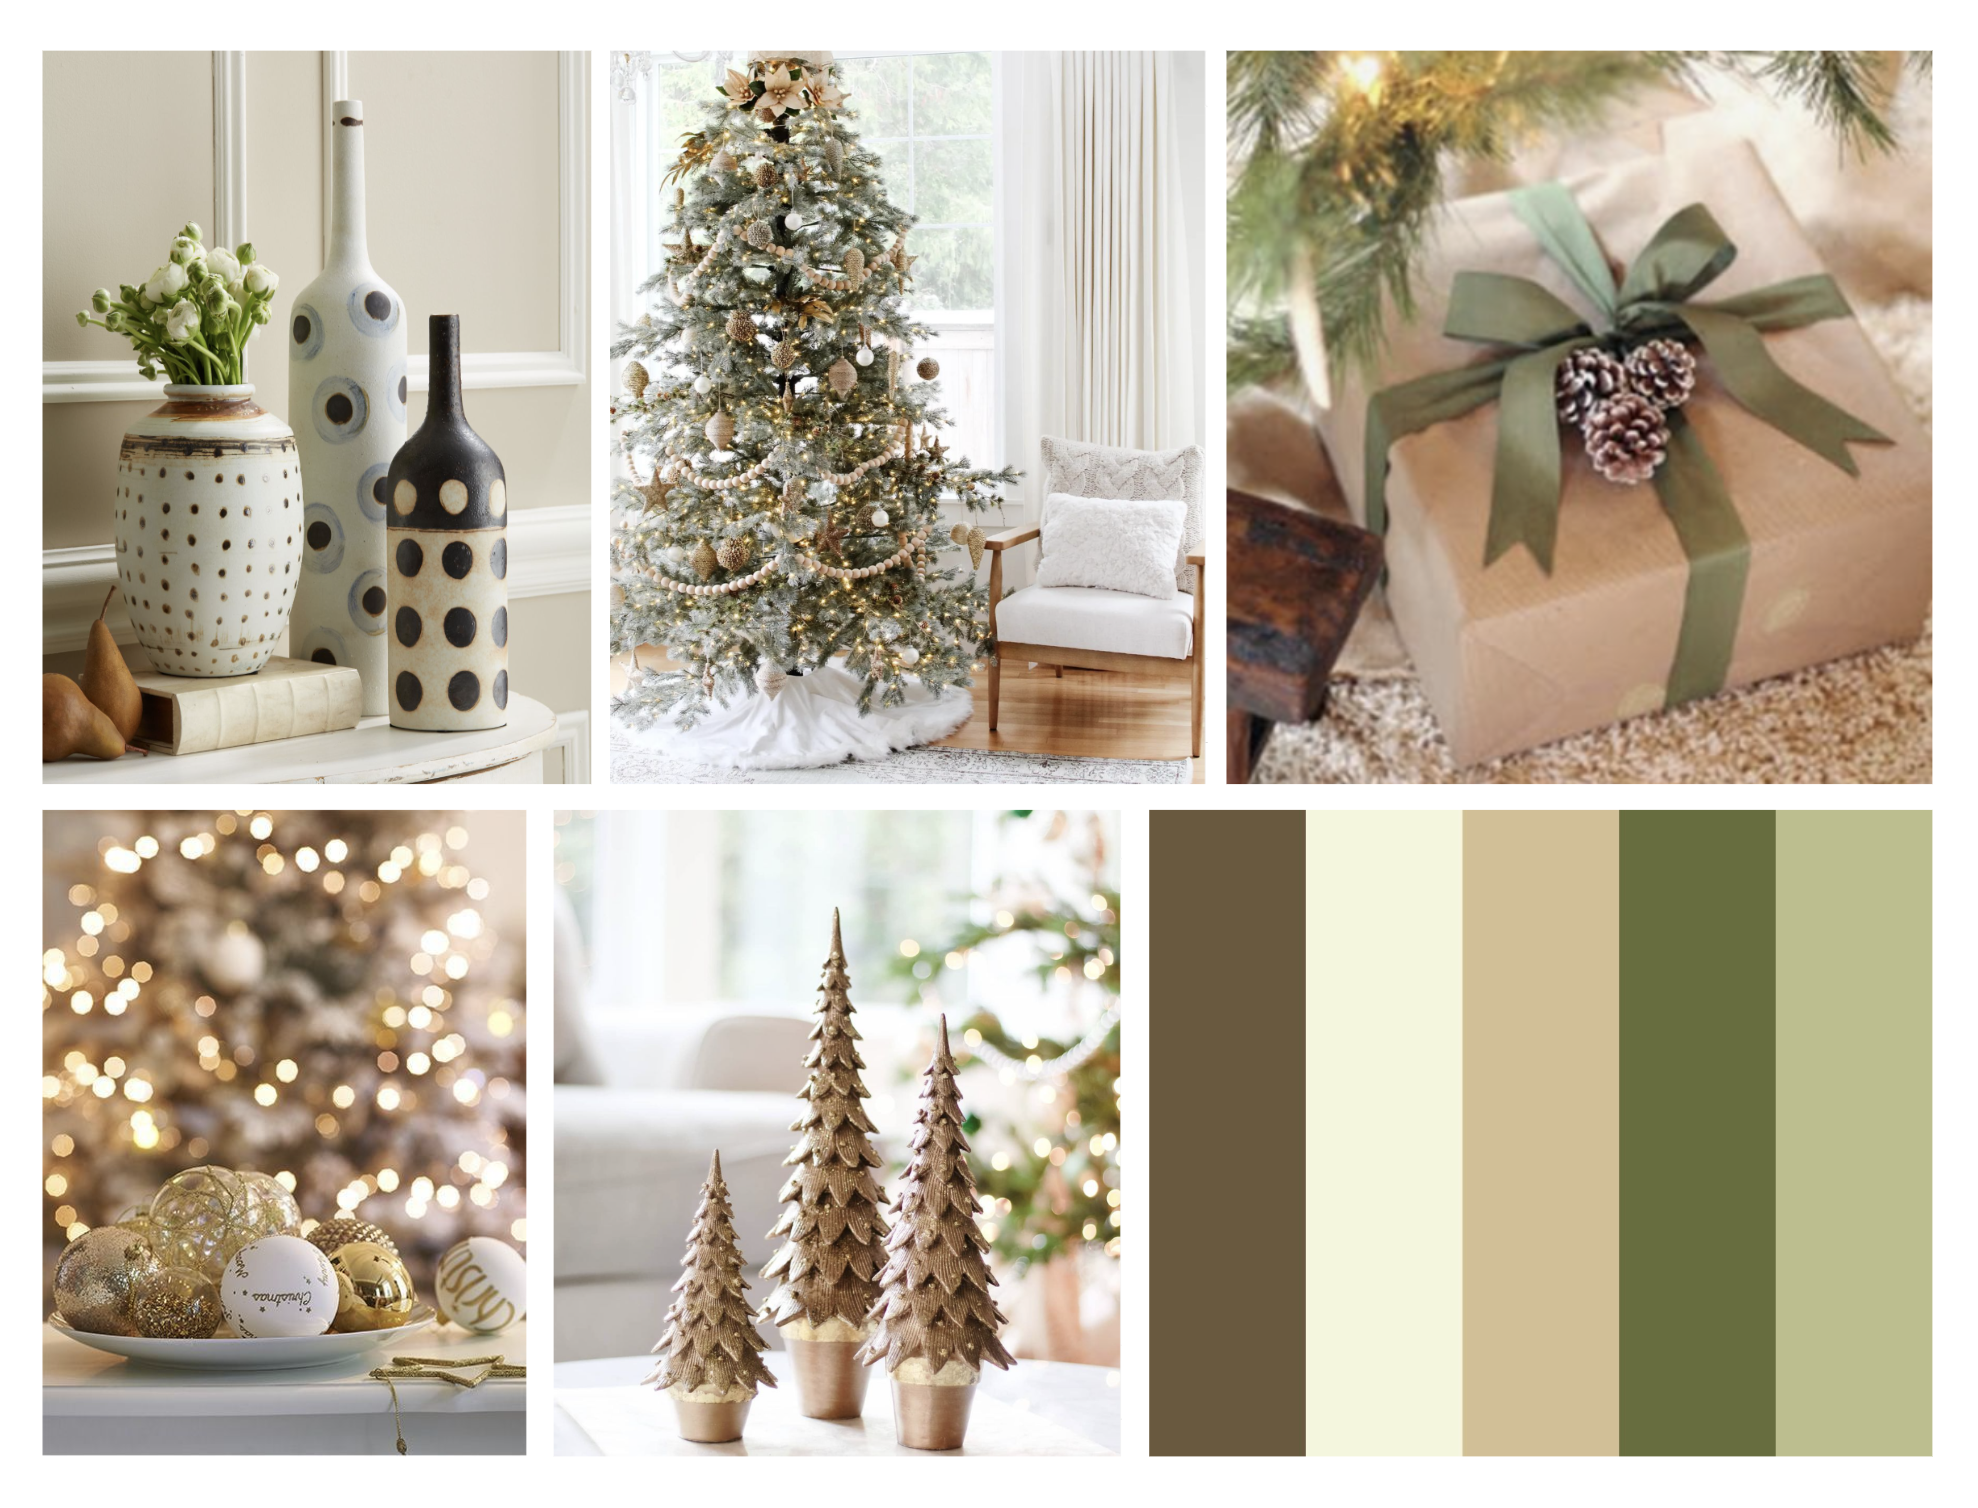 Photographer's mood board for christmas decor client. art direction set design props scenic.